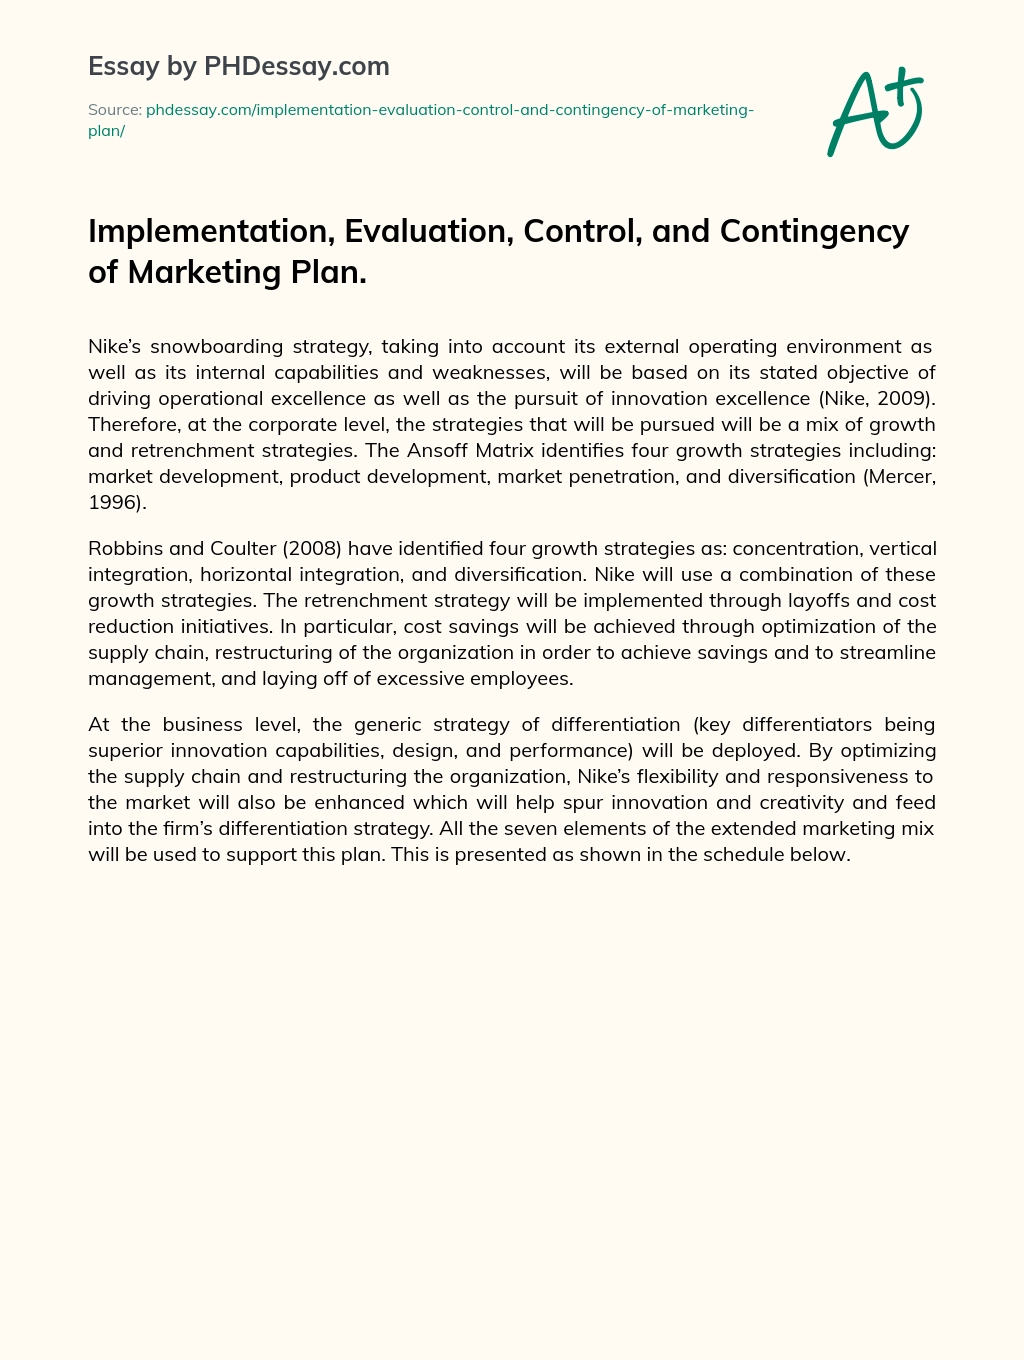 Implementation, Evaluation, Control, and Contingency of Marketing Plan. essay